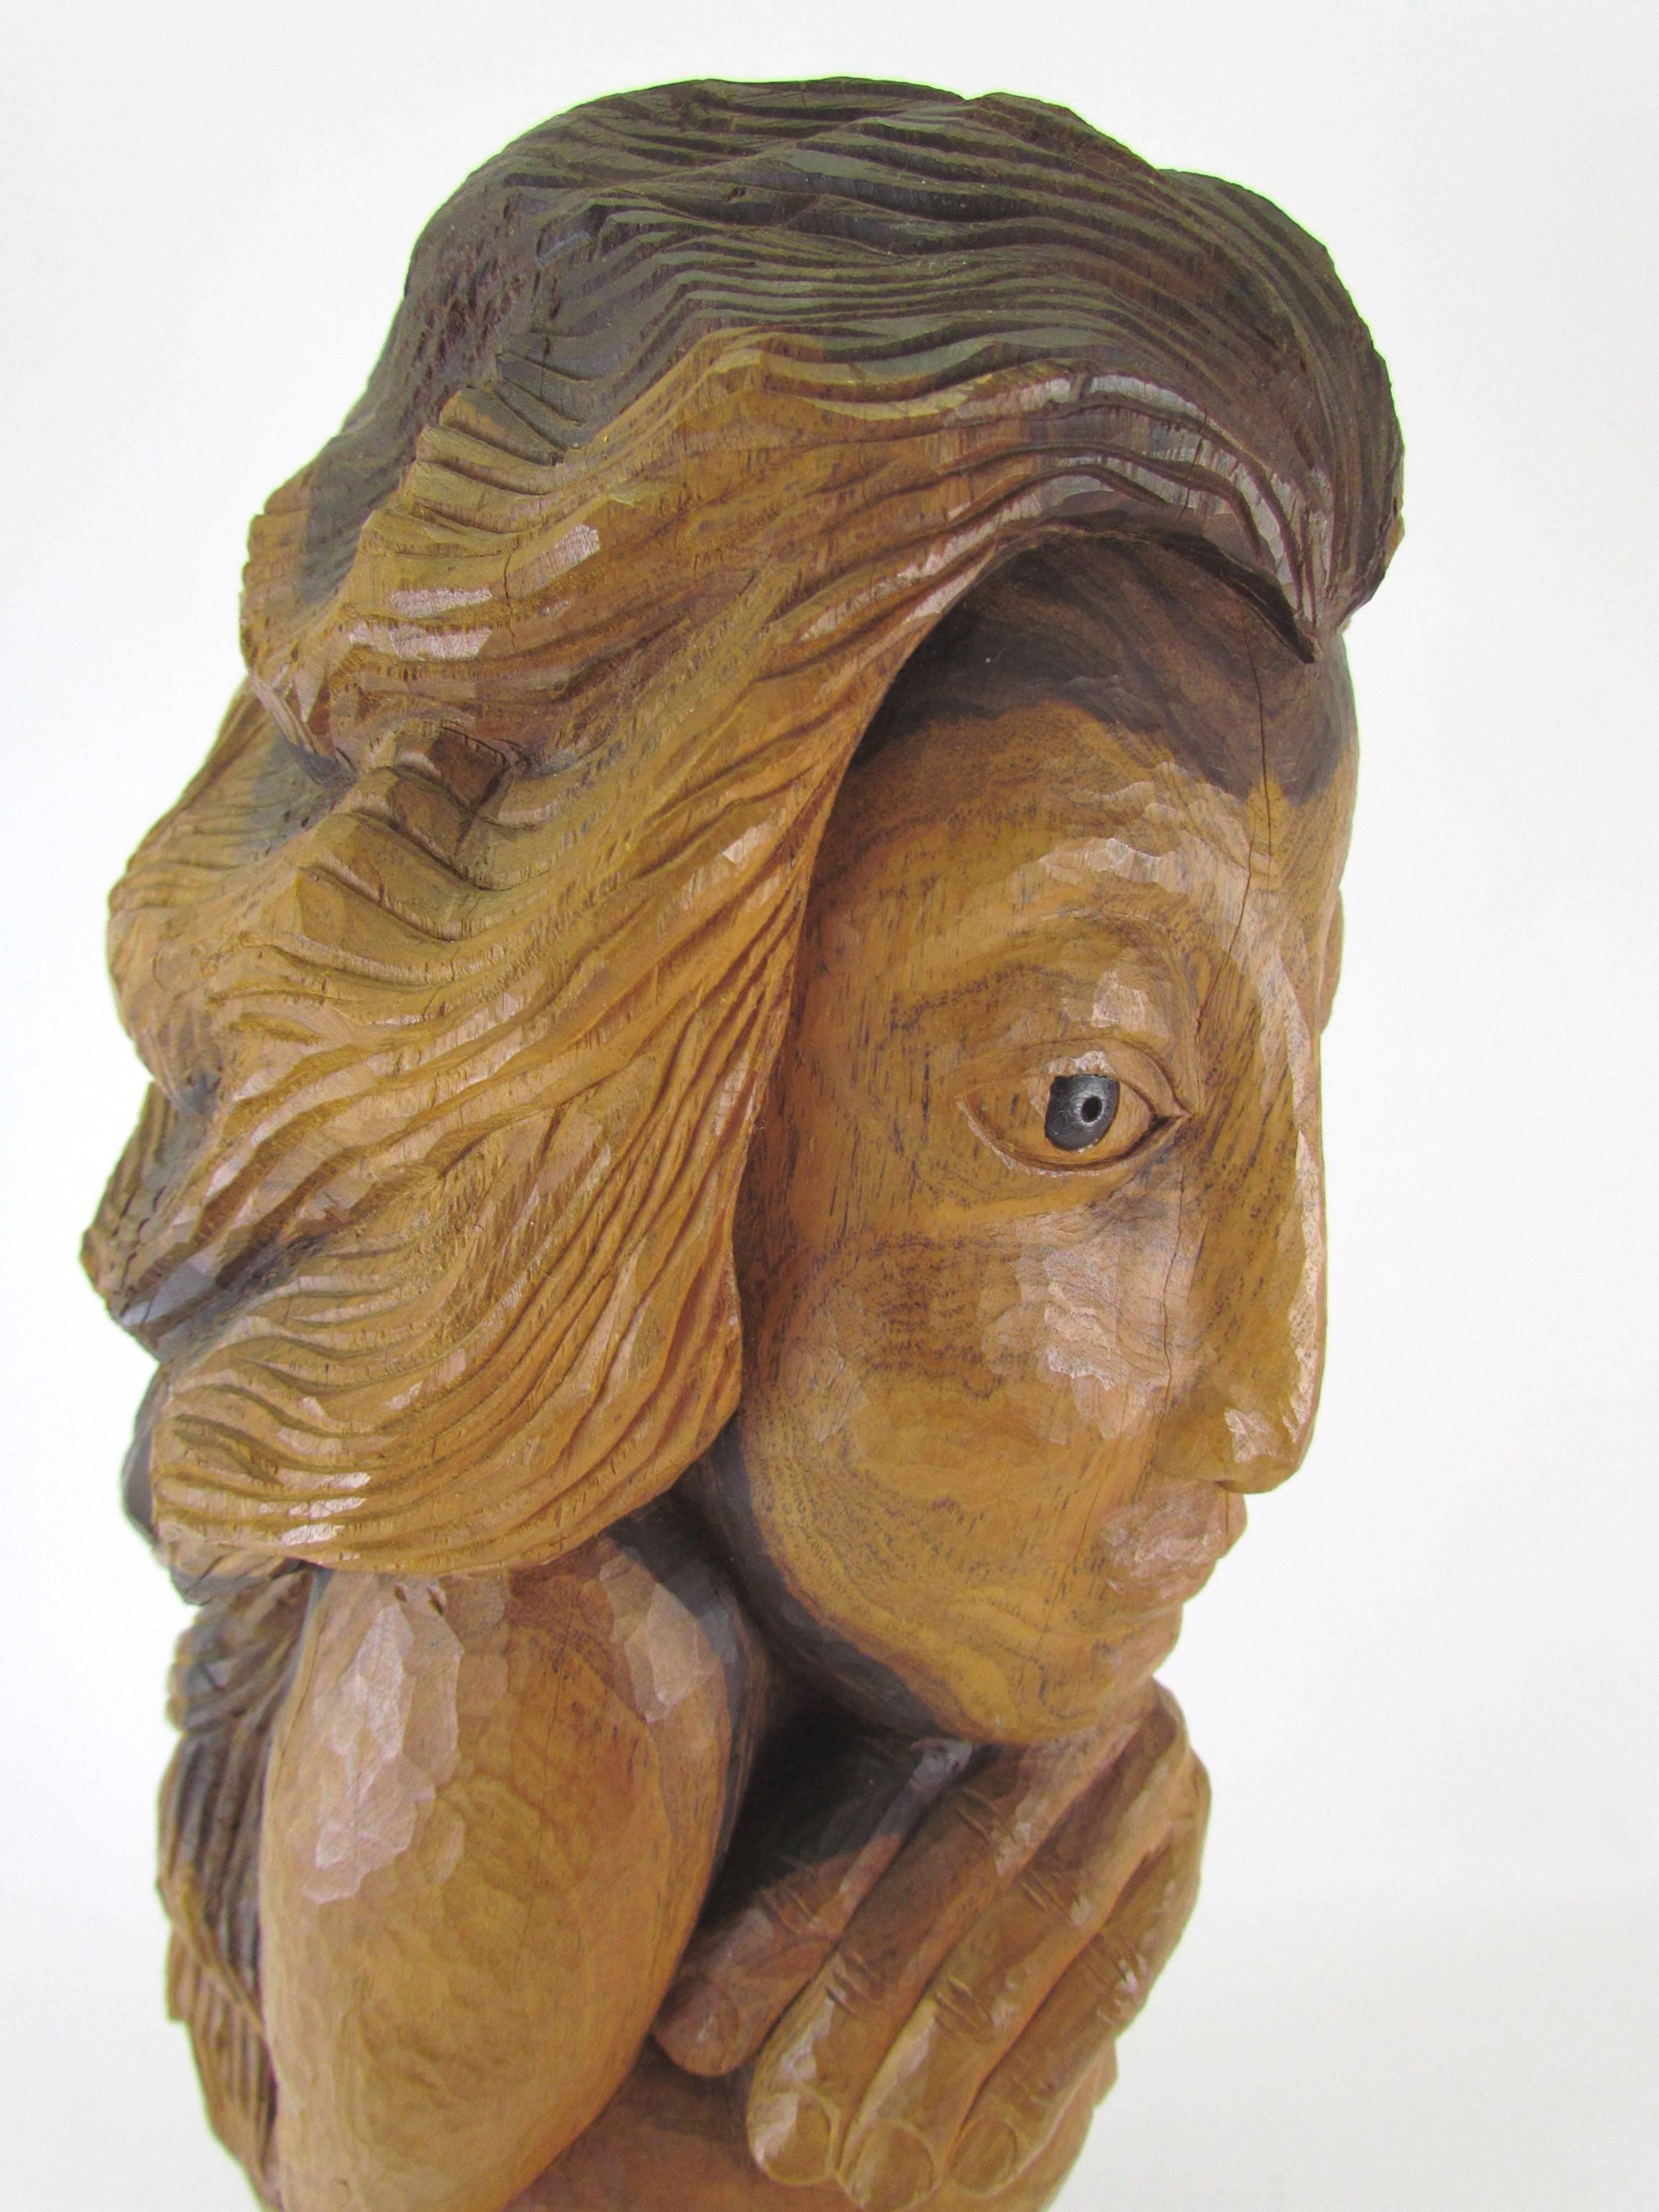 American Carved Wood Mid-Century Sculpture Titled “Miss Num” by Diane Derrick For Sale